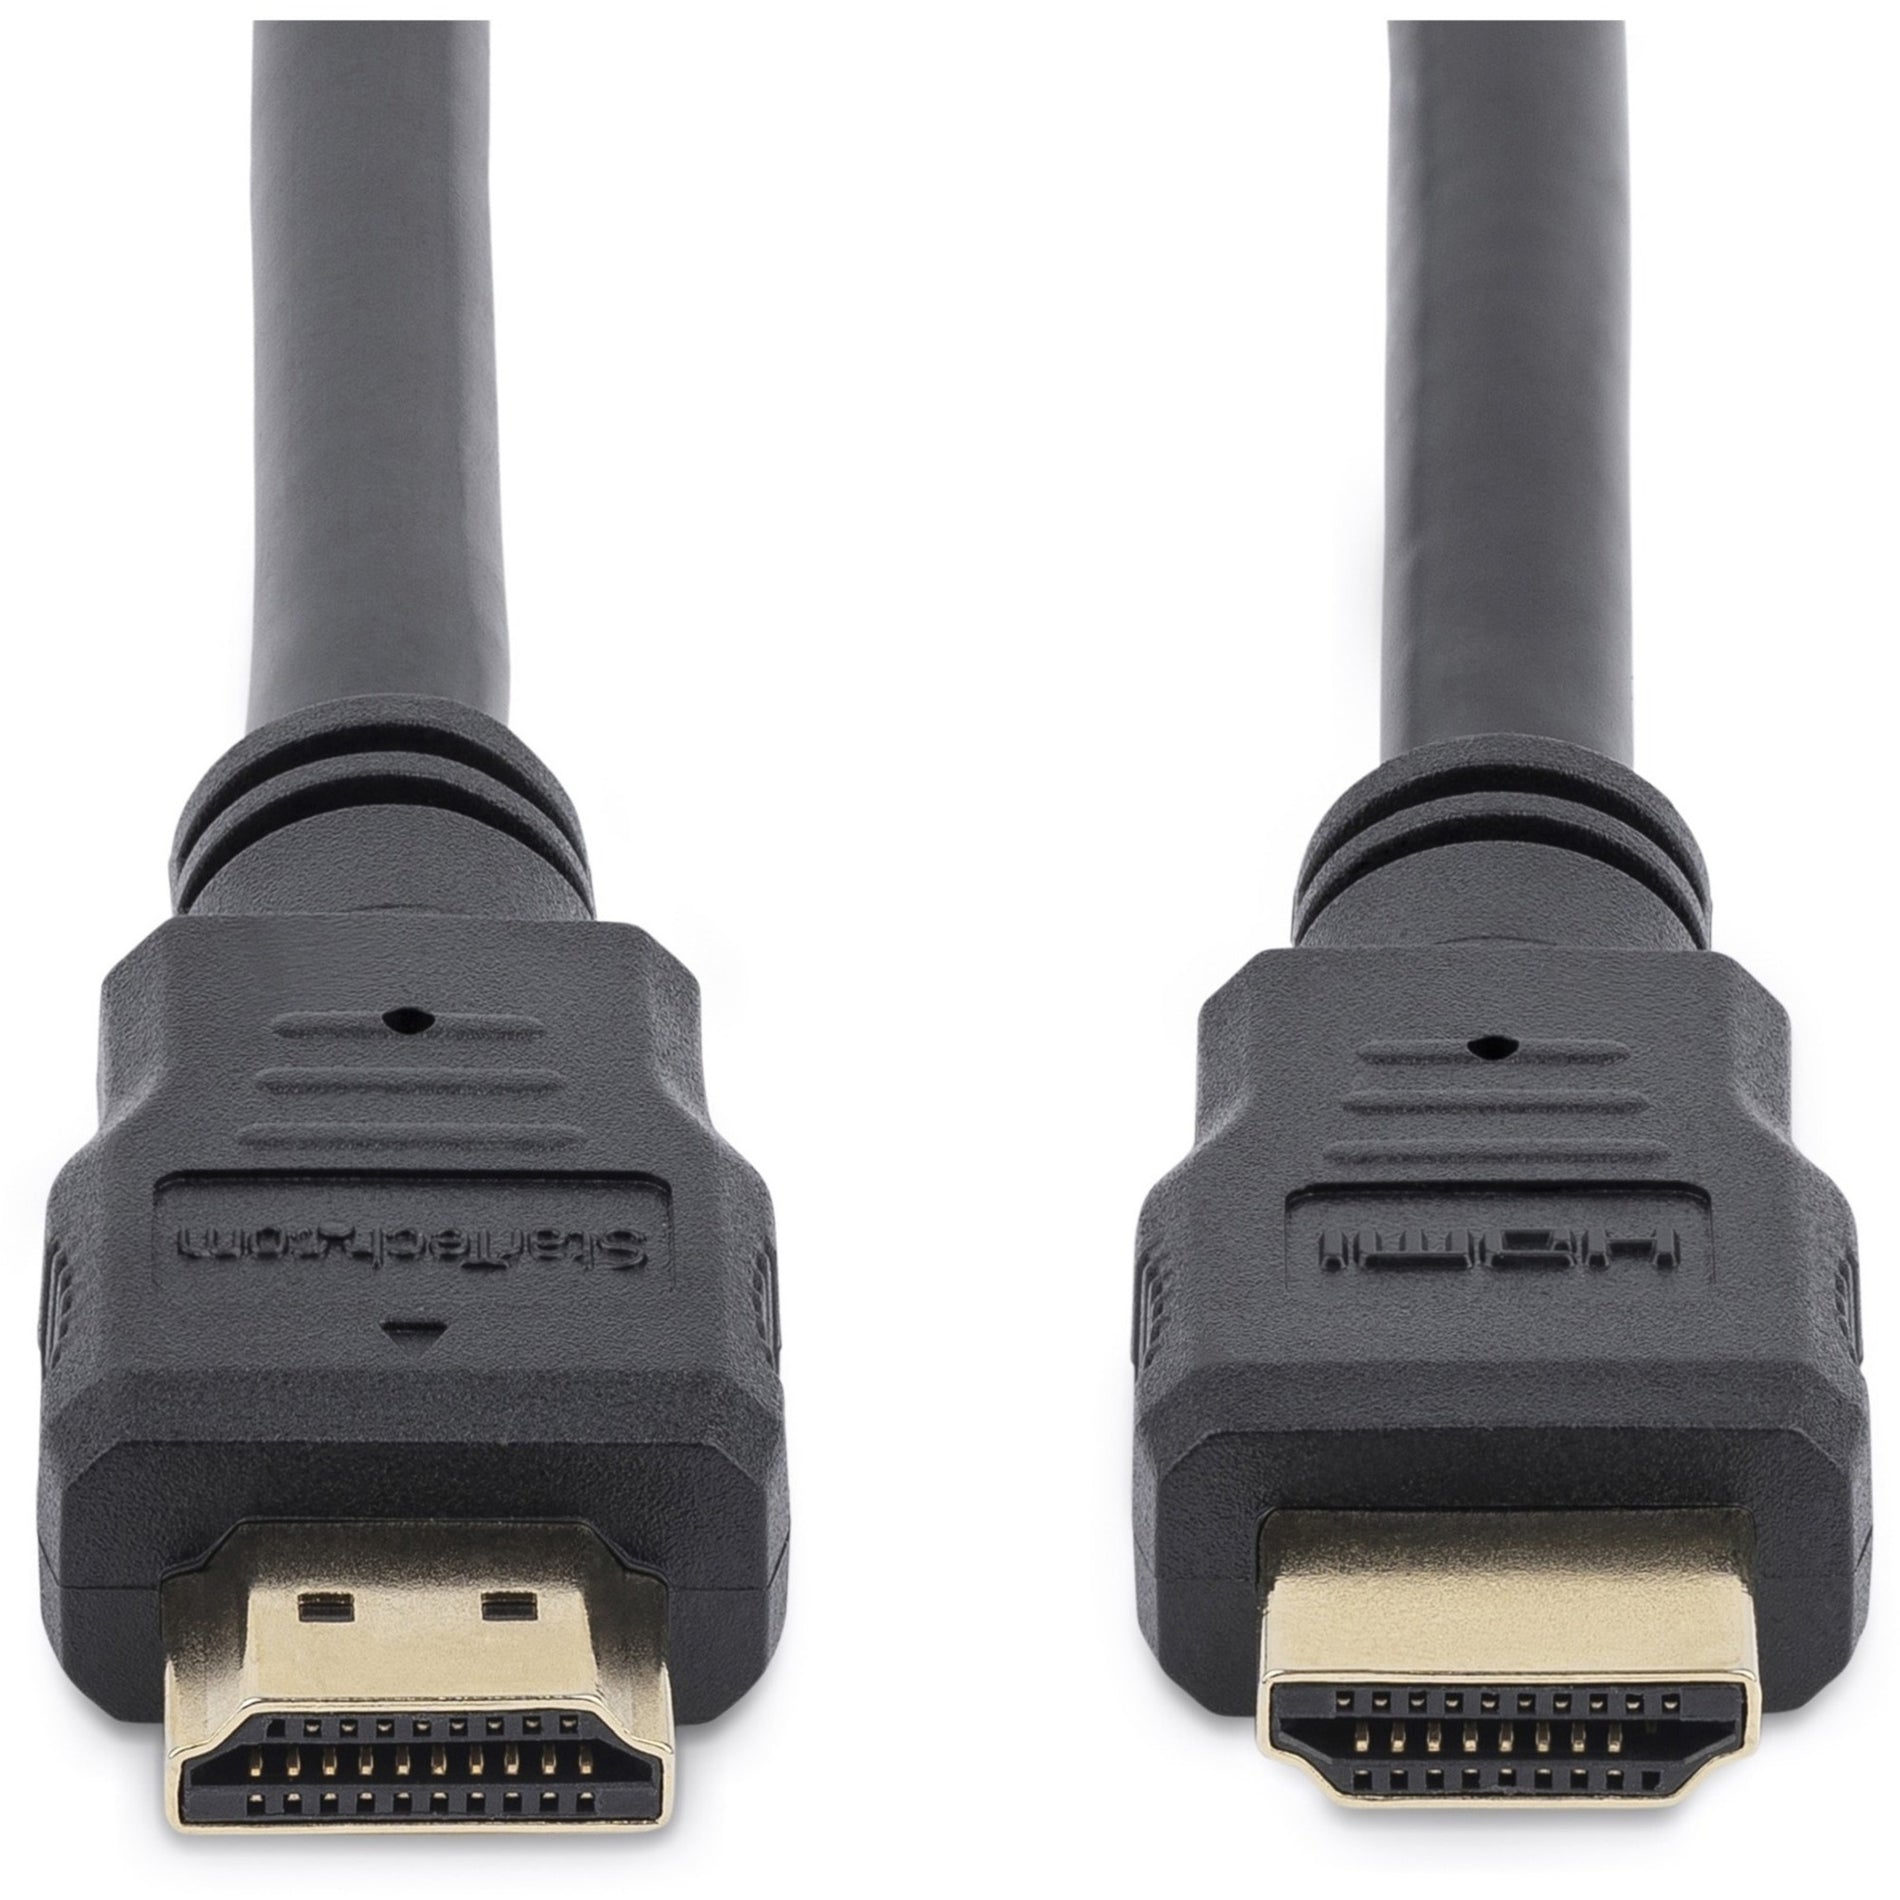 StarTech.com HDMM8 8 ft High Speed HDMI Cable - Ultra HD 4k x 2k HDMI Cable, Molded, Strain Relief, Corrosion-free, Gold Plated Connectors